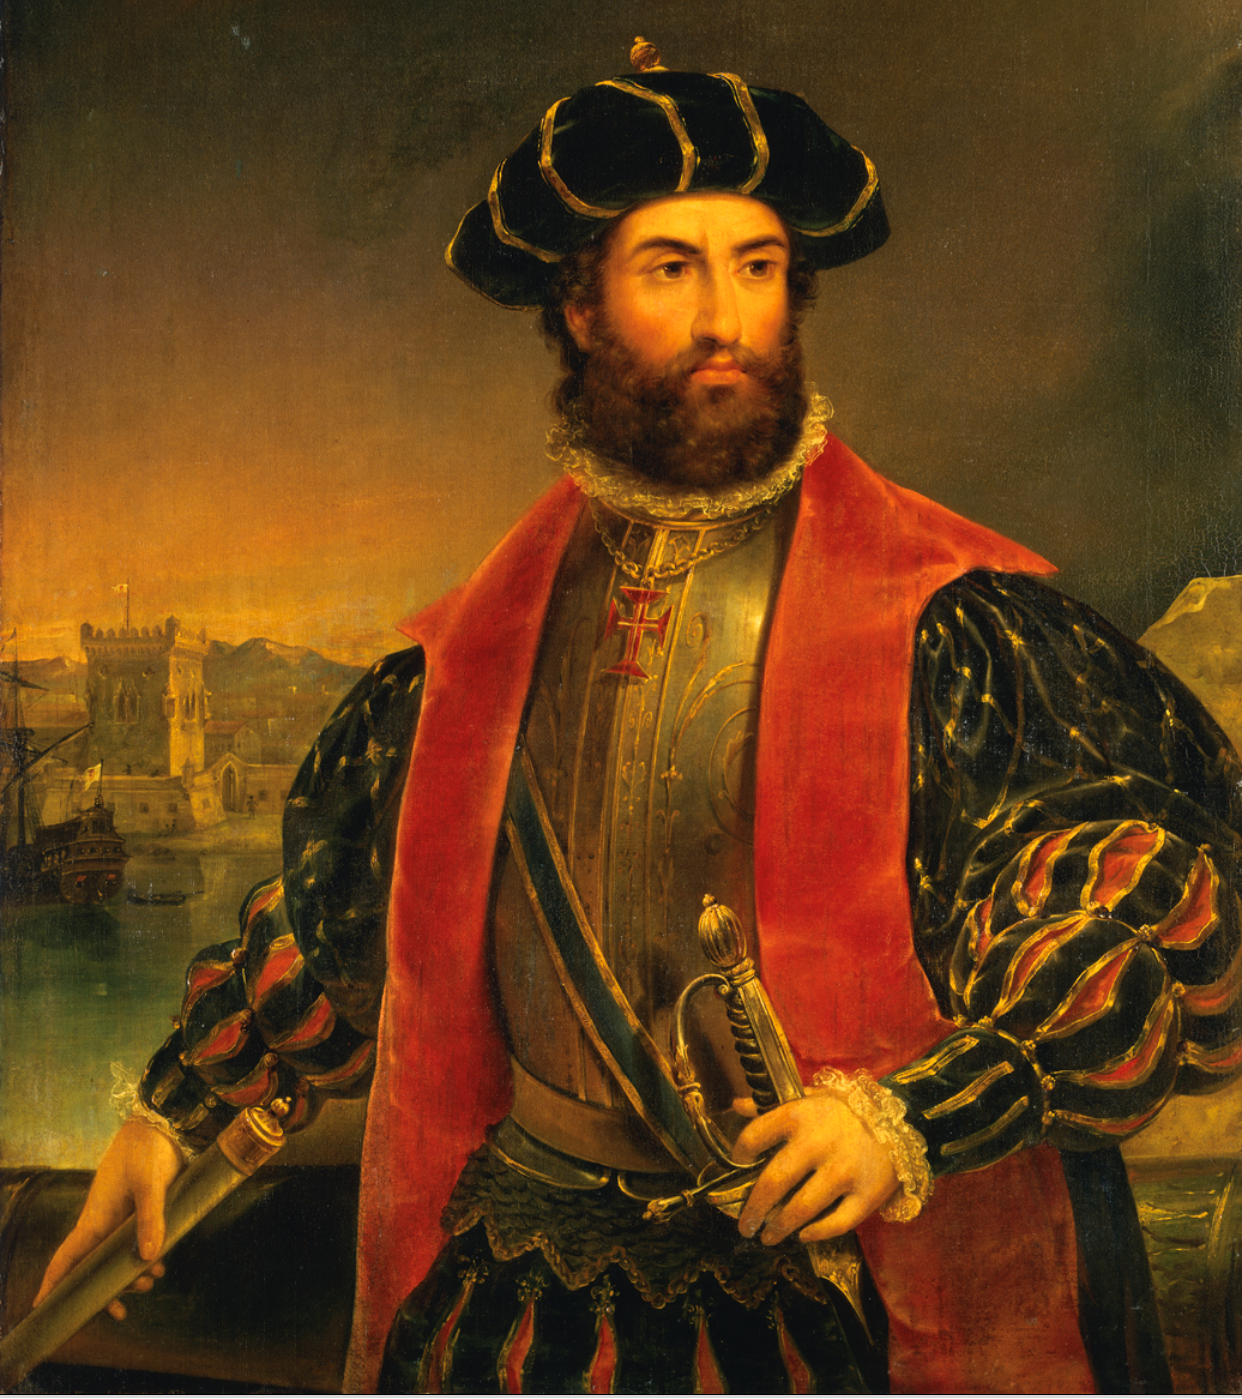 what did vasco da gama want to discover